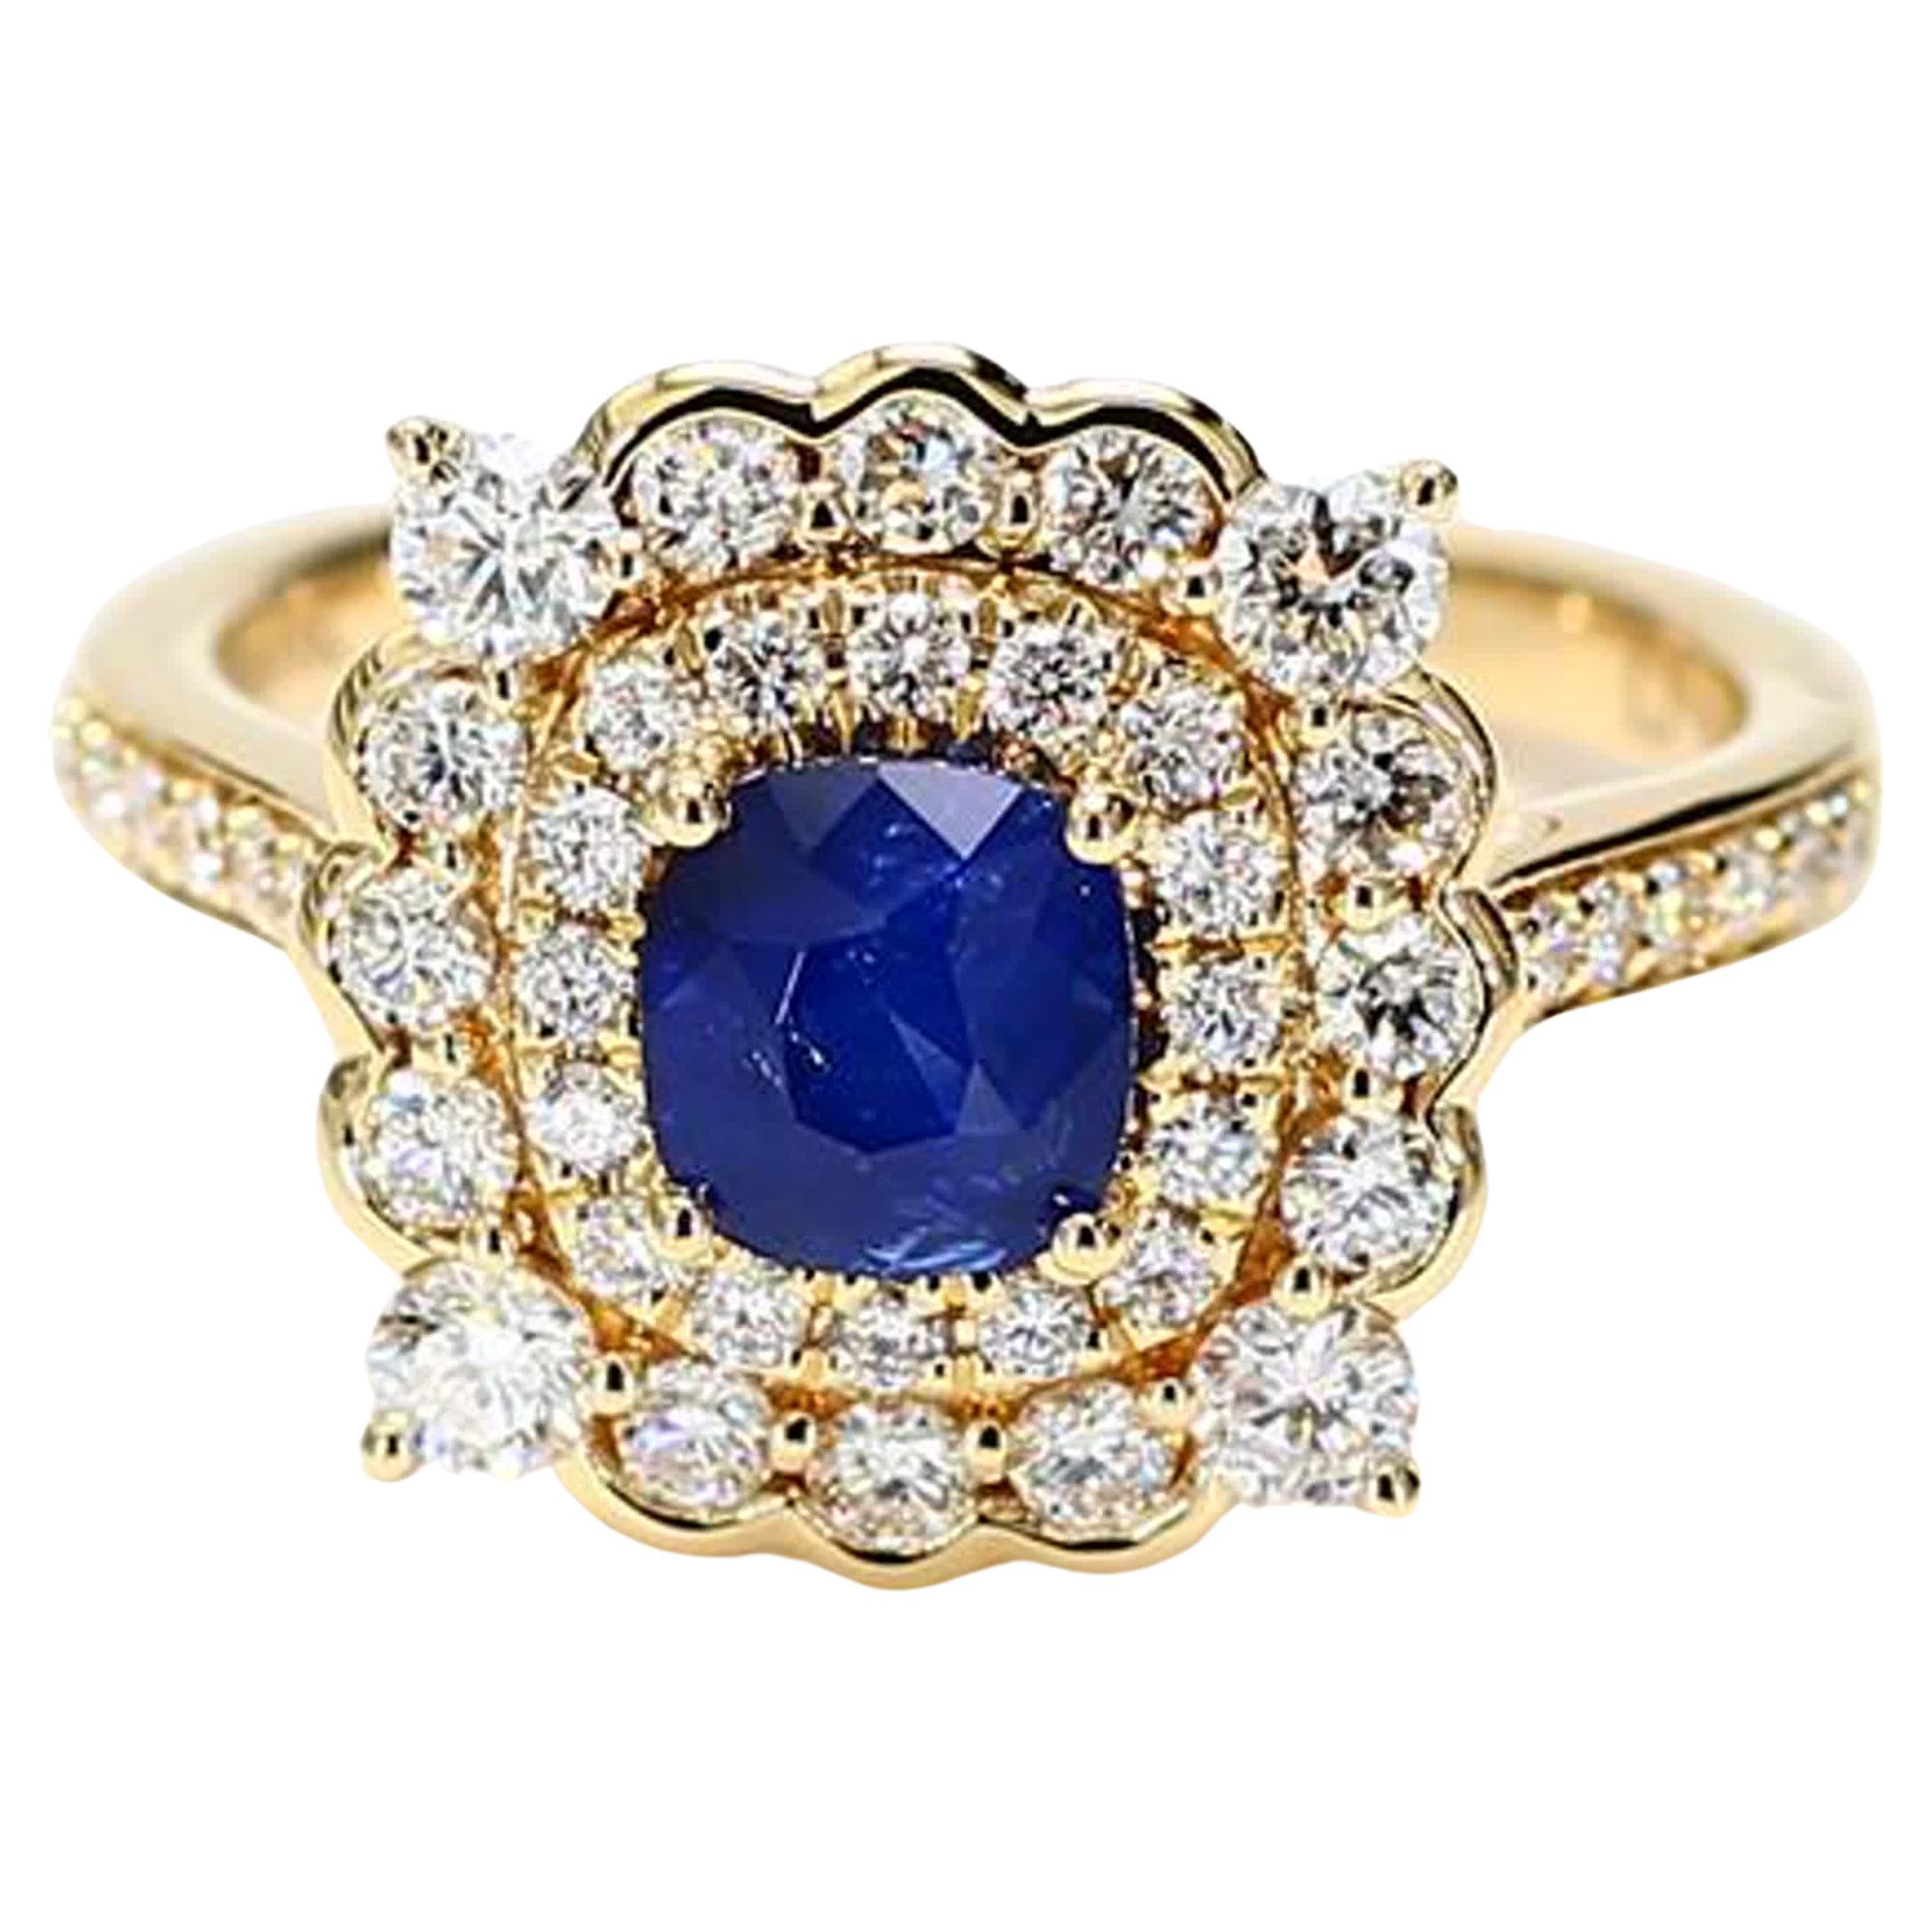 Natural Blue Cushion Sapphire and White Diamond 1.96 Carat TW Gold Cocktail Ring